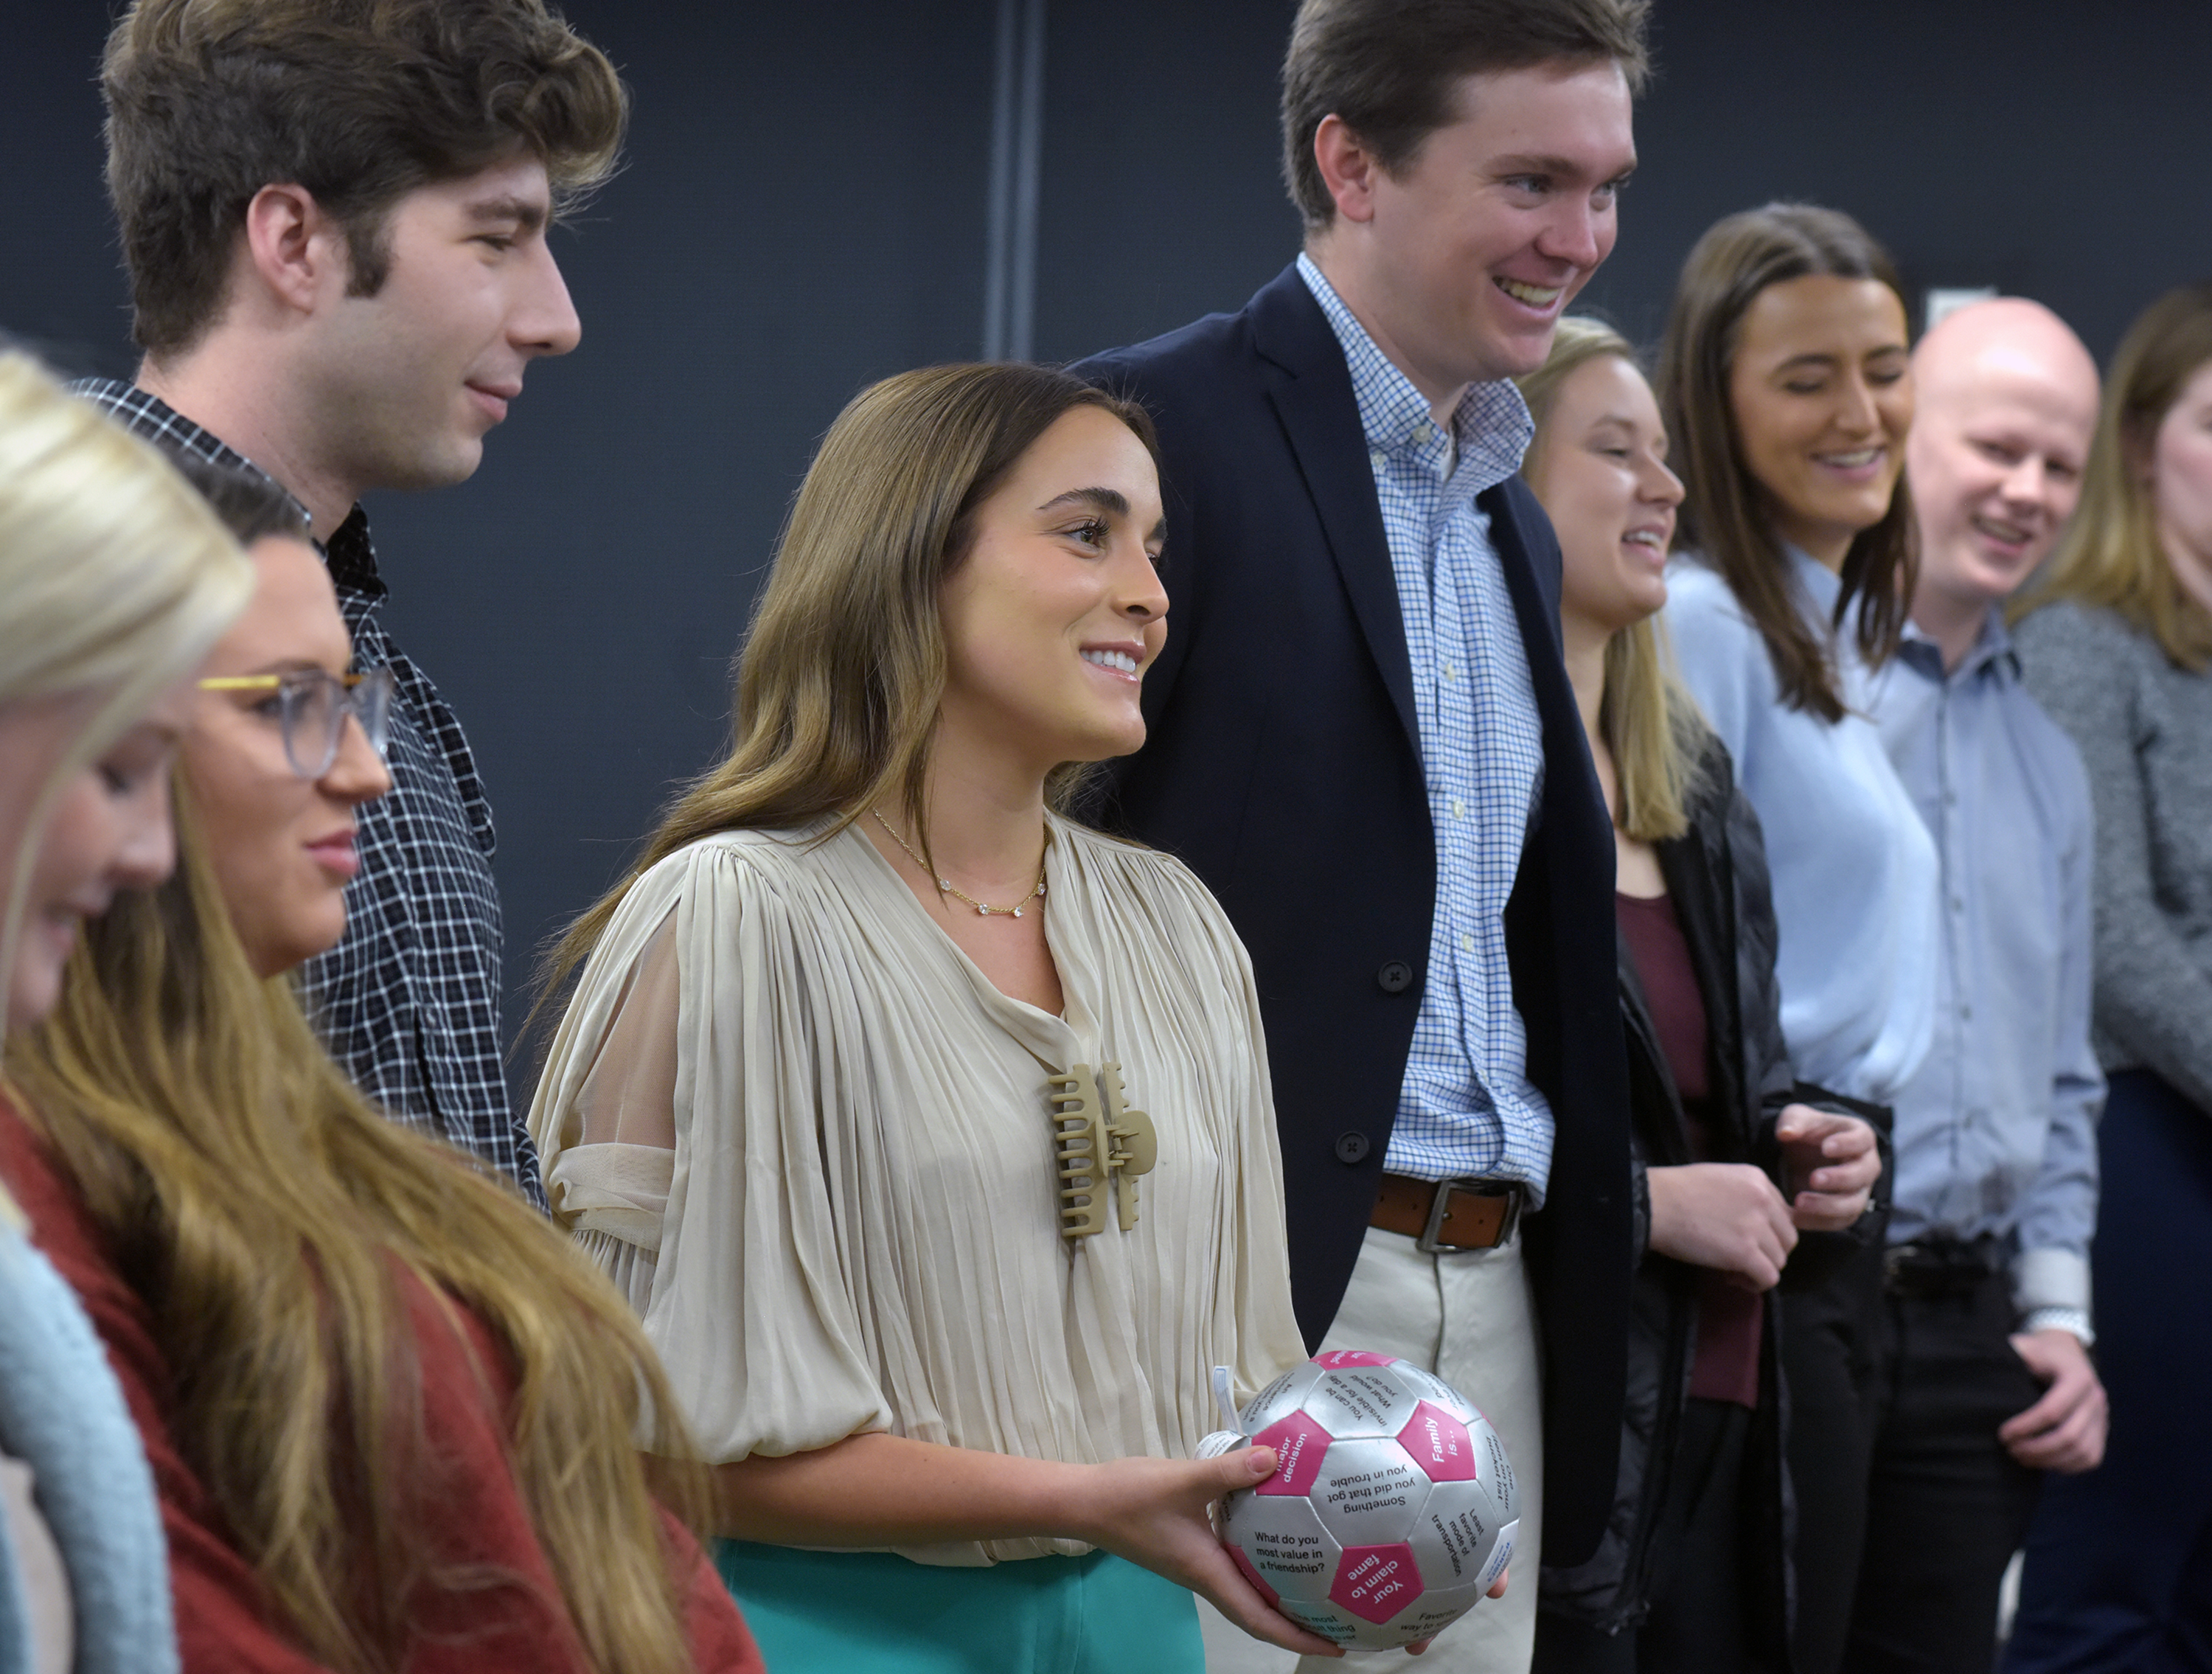 Chloe McDaniel participates in a meet and greet activity at MSU Meridian. The 23-year-old was one in a cohort of 30 seeking a Master of Physician Assistant Studies, a two-and-a-half-year program offered in downtown Meridian. 